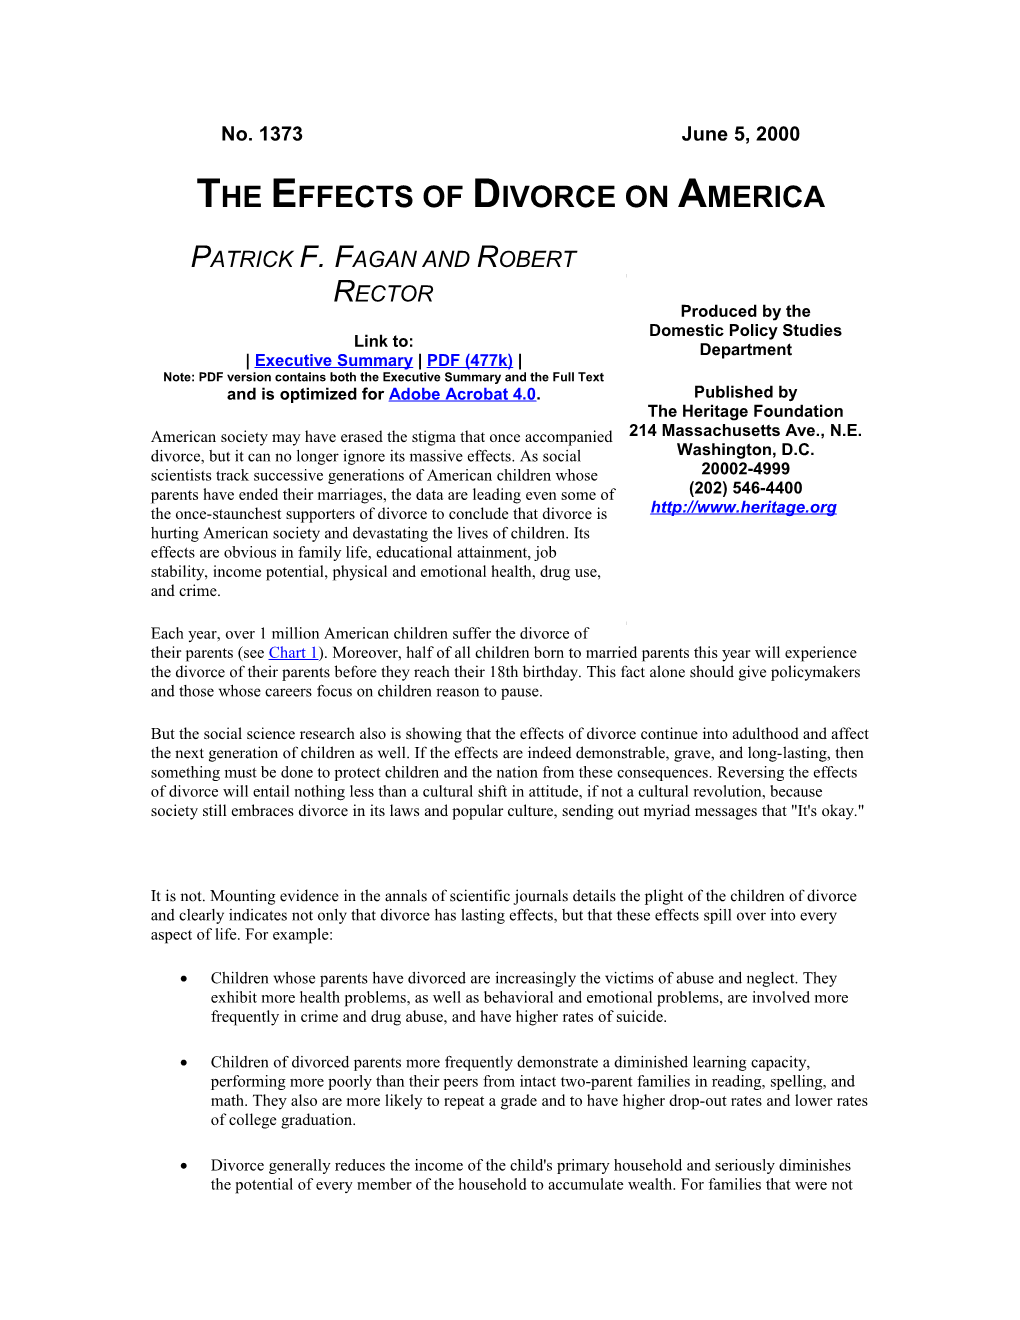 The Effects of Divorce on America